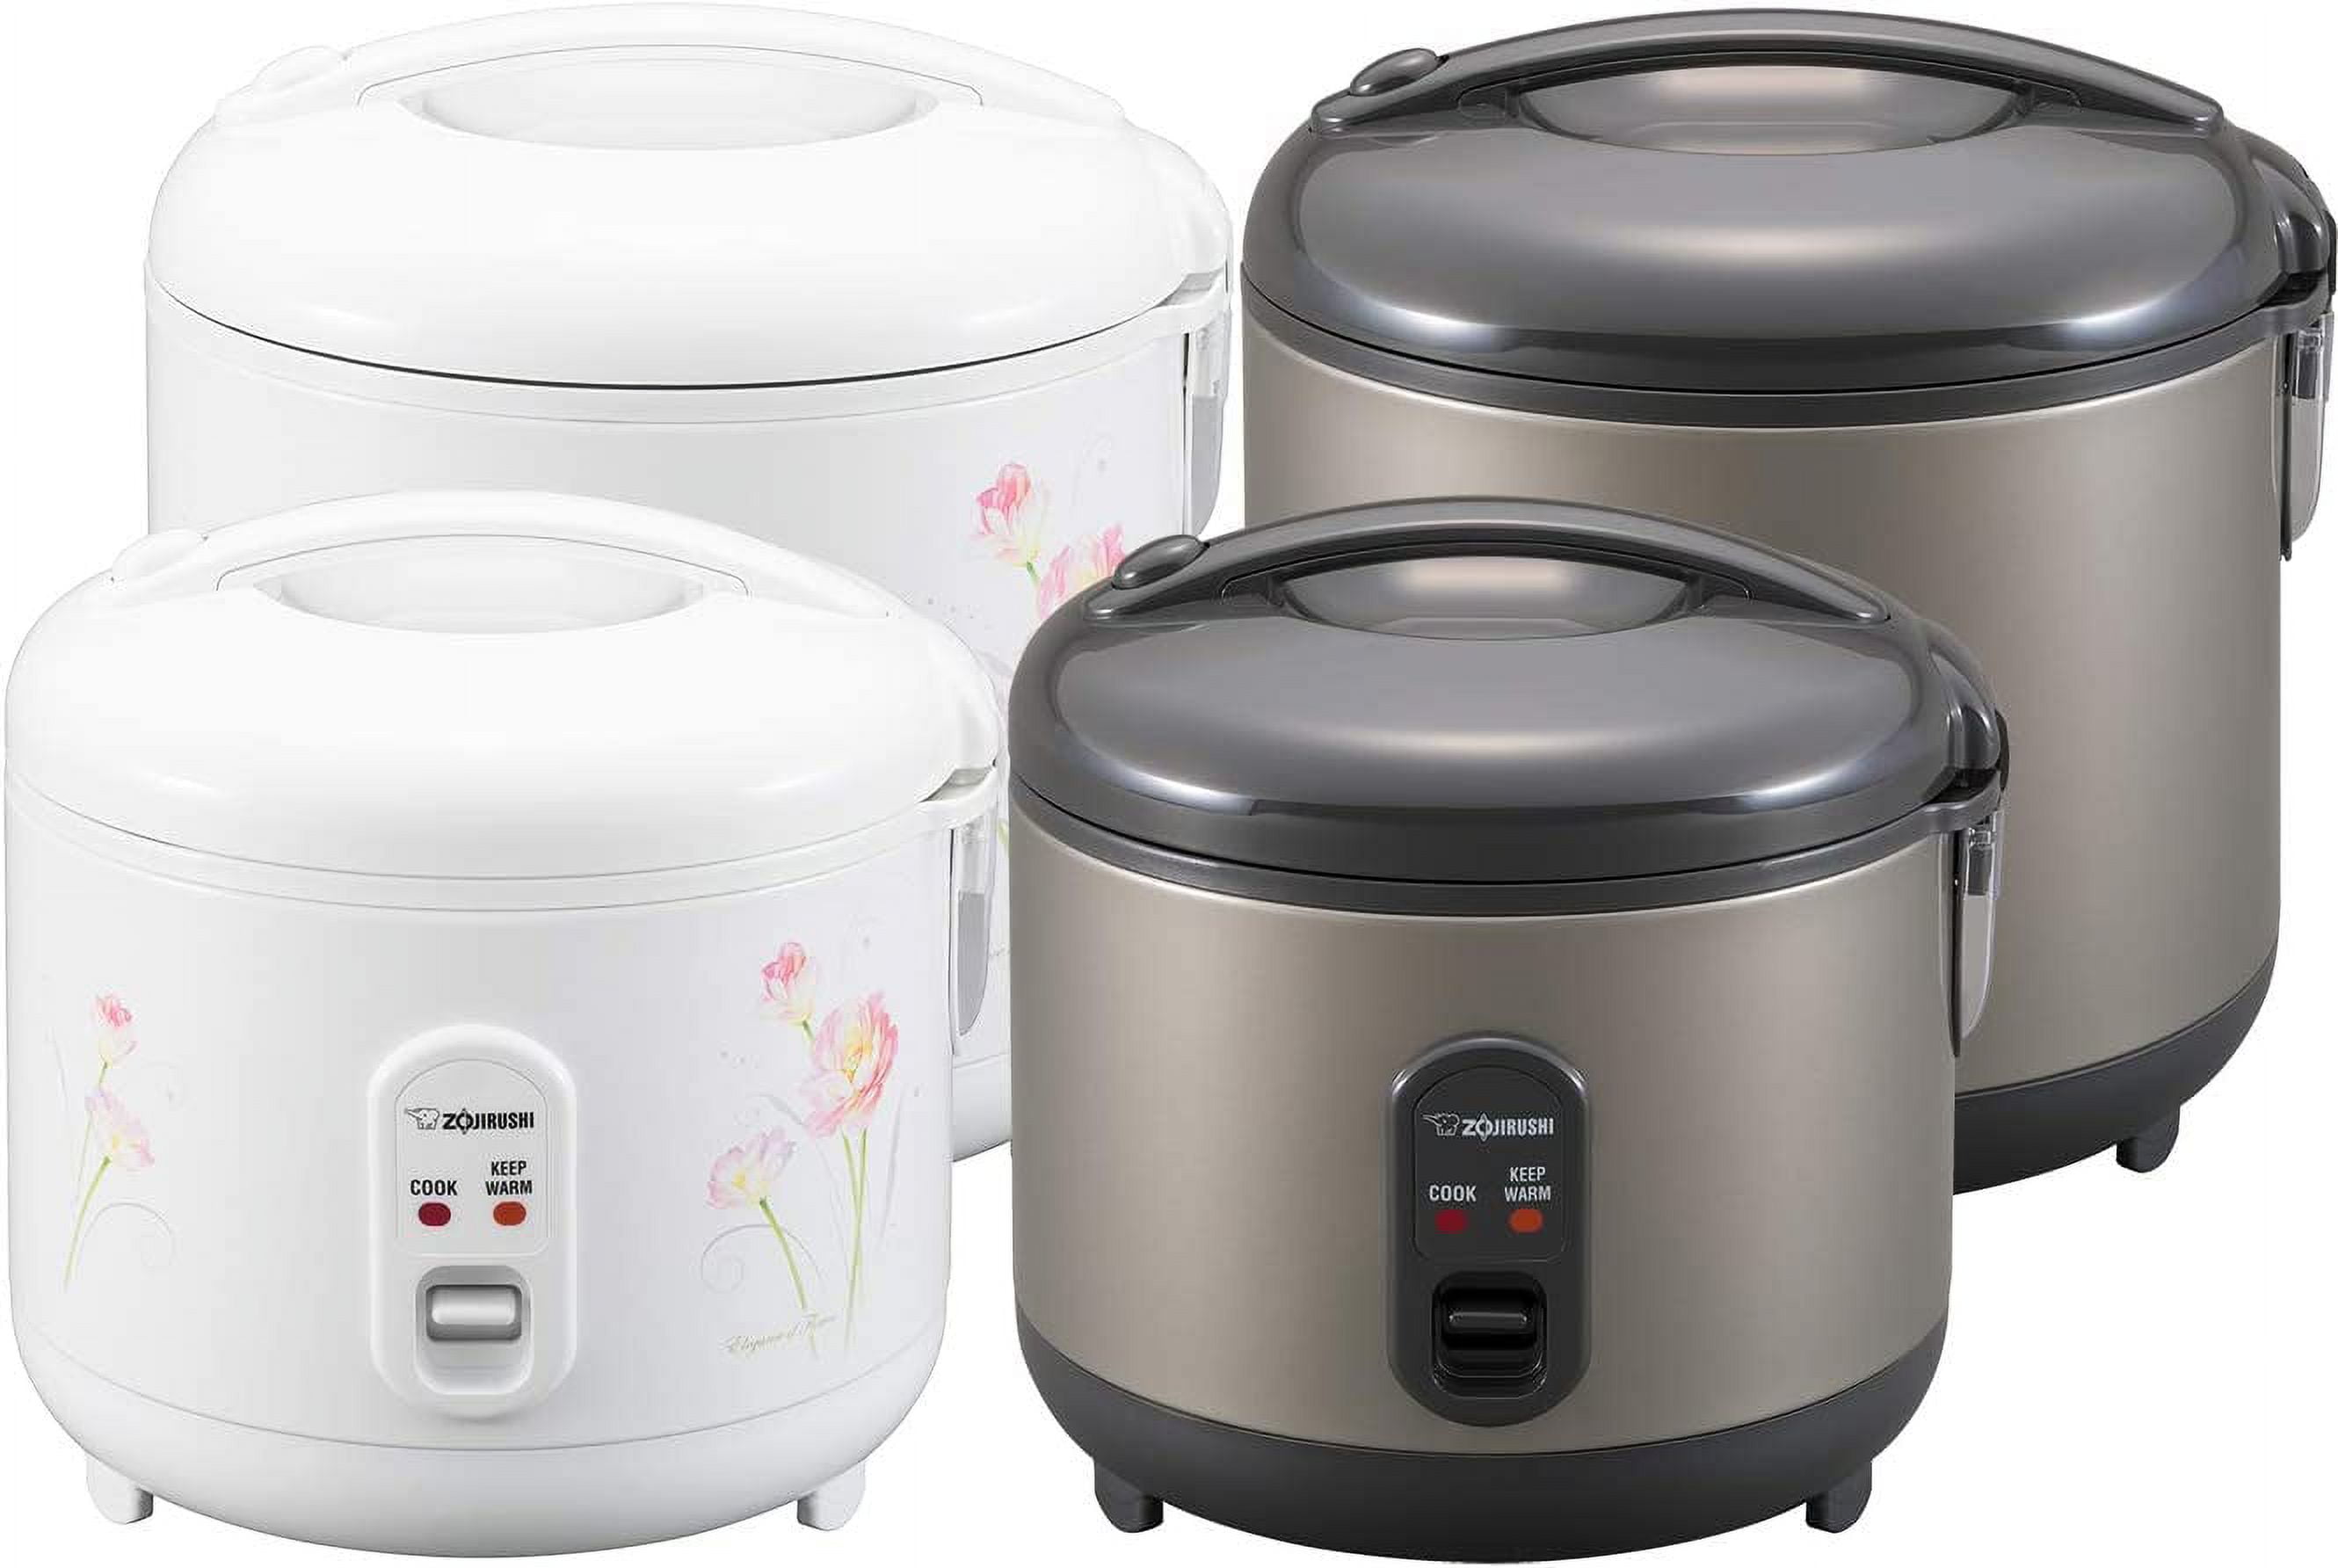 Zojirushi RNAB09F9YDSSB zojirushi hello kitty 5.5-cup automatic rice cooker  and warmer (white) bundle with 9.5-inch rice washing bowl with side and b